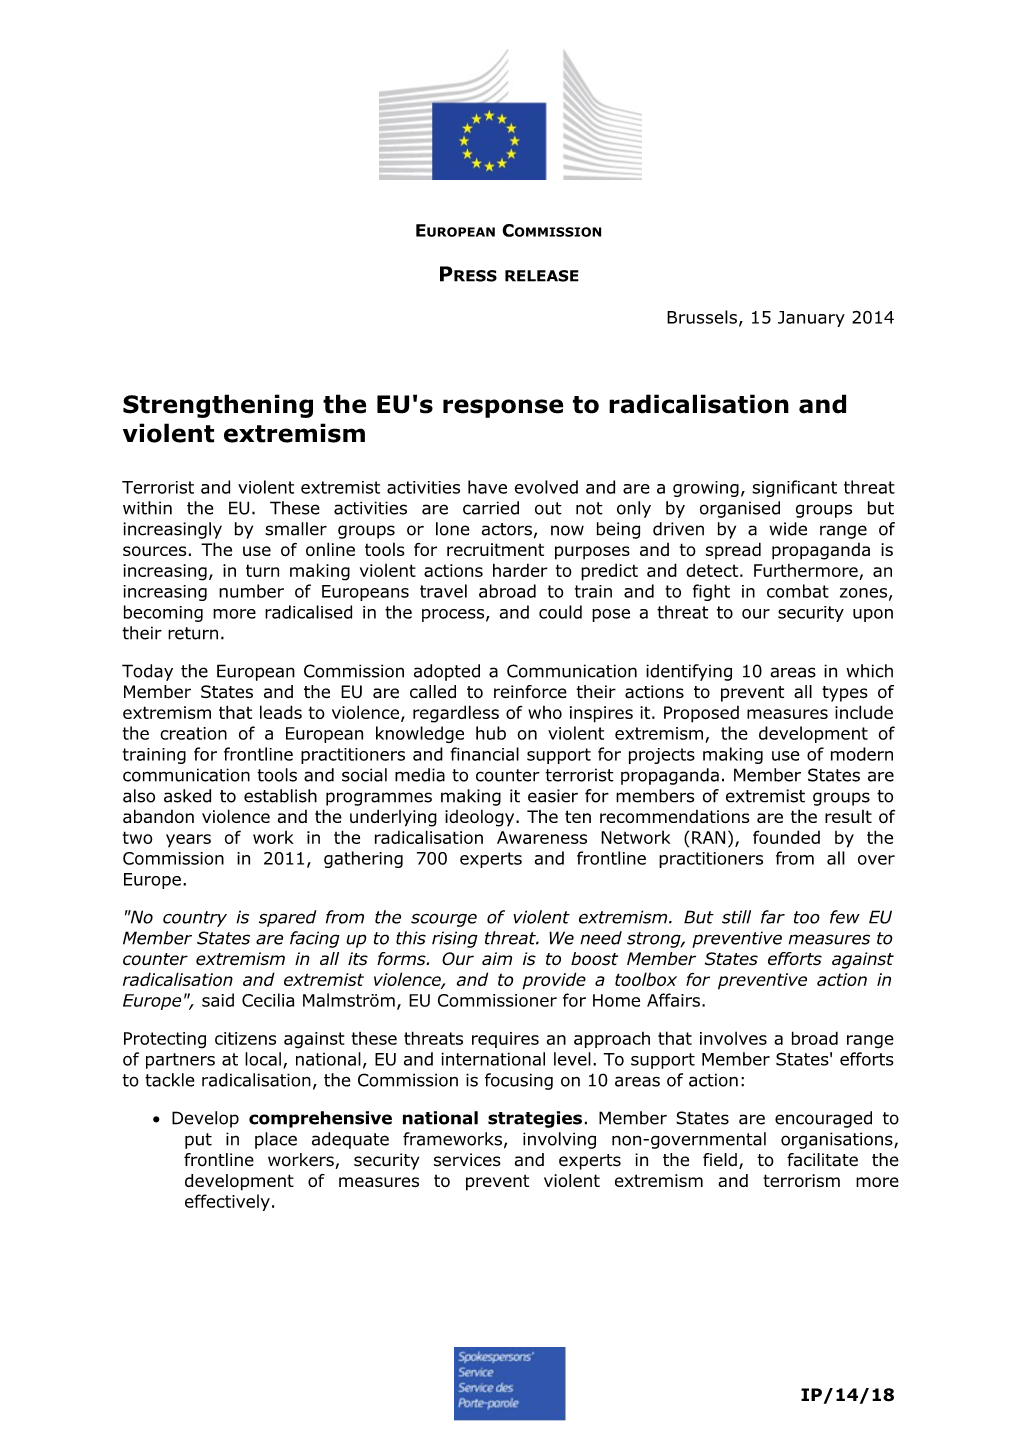 Strengthening the EU's Response to Radicalisation and Violent Extremism